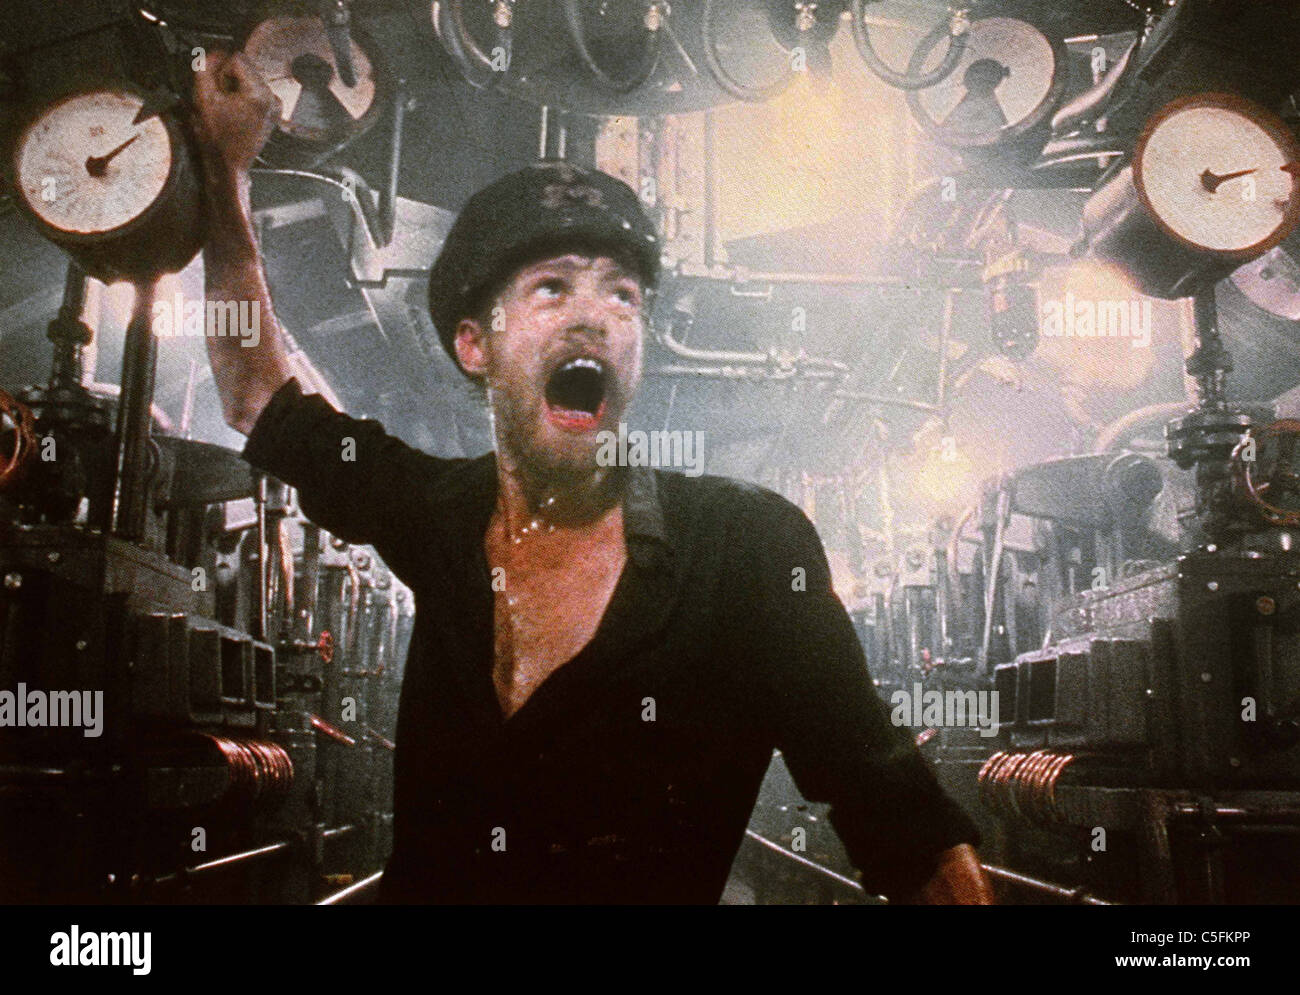 THE BOAT (1981) DAS BOOT (ALT) ERWIN LEDER TBOT 007FOH MOVIESTORE COLLECTION LTD Stock Photo